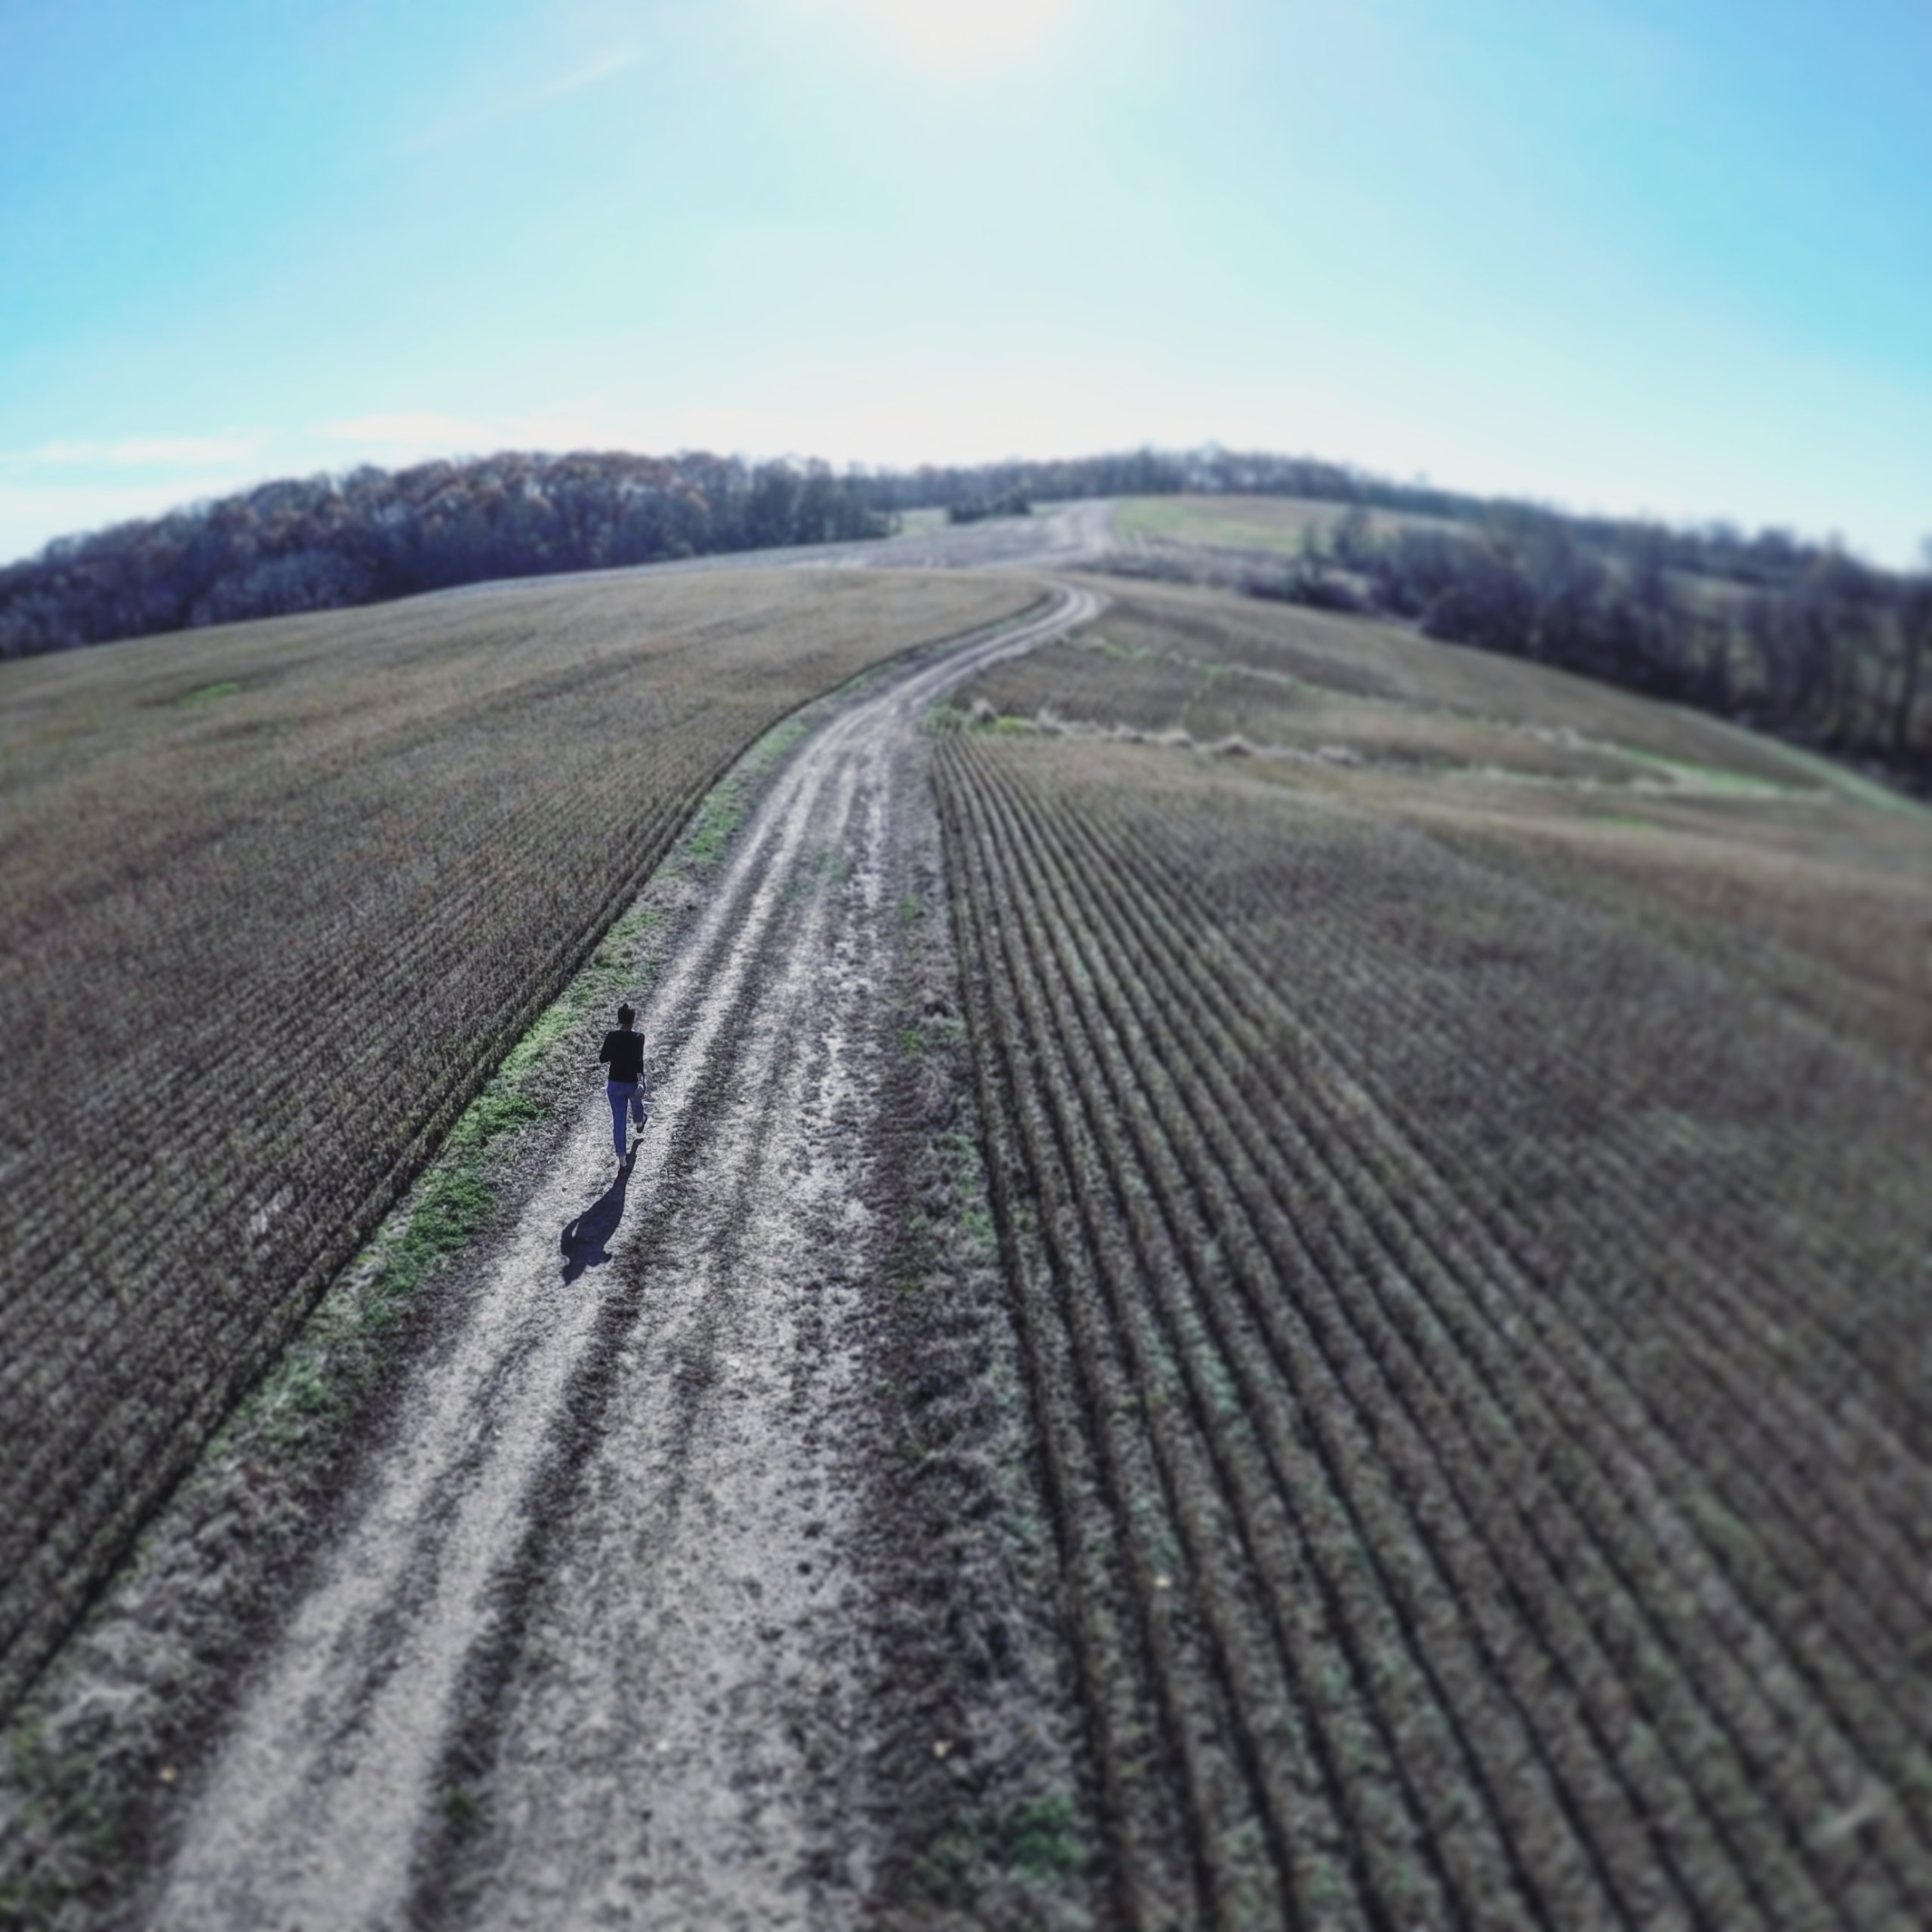 Drone photo of a runner with a long shadow on a trail in the middle of agricultural fields